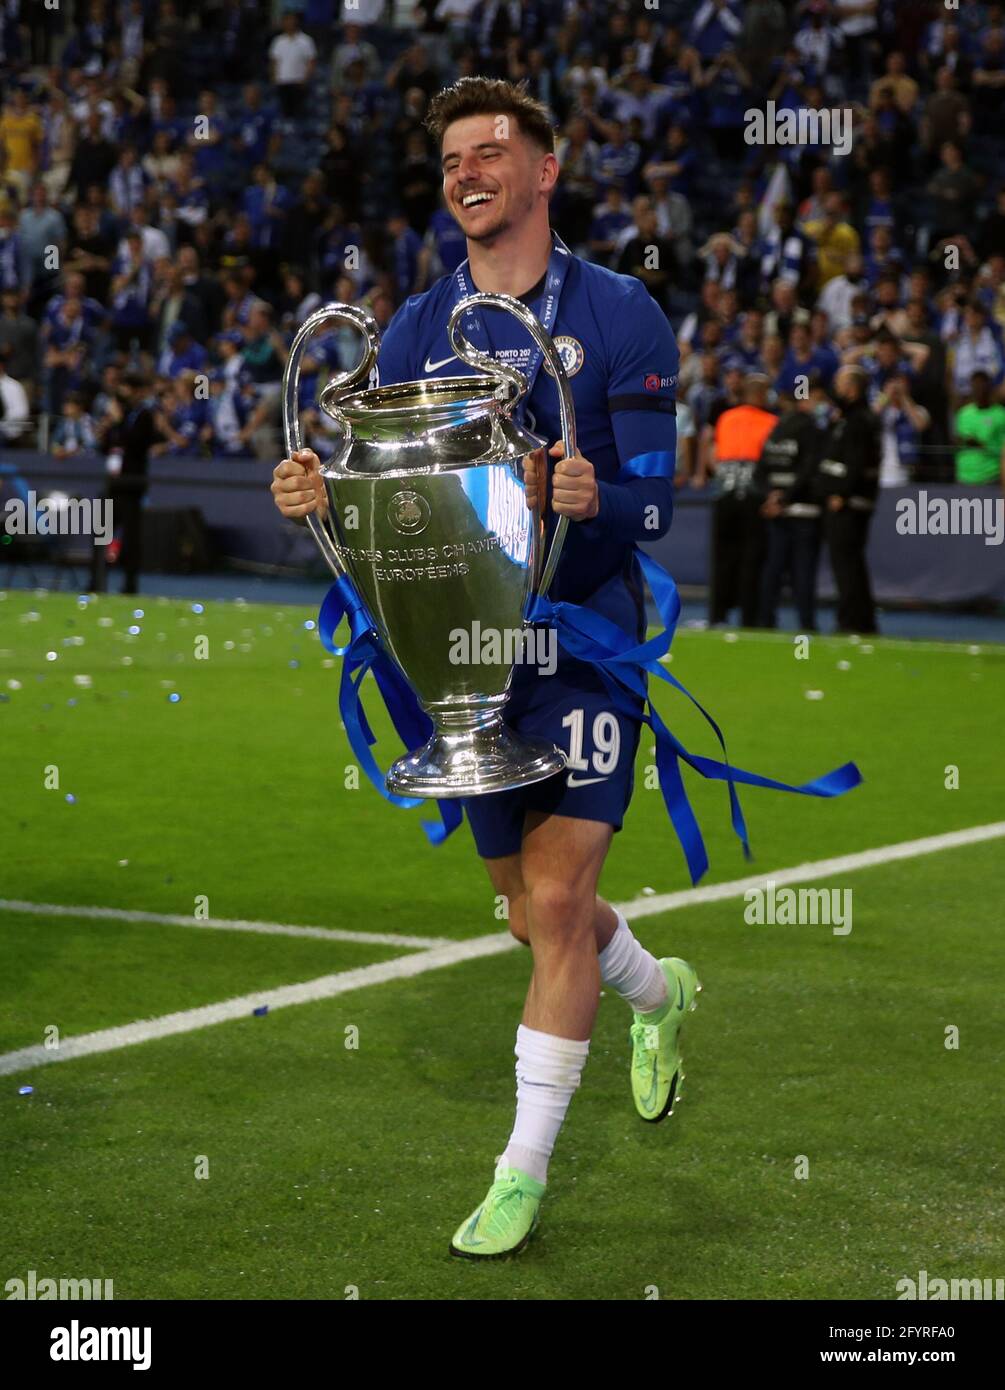 Chelsea S Mason Mount Lifts The Trophy Following Victory Over Chelsea In The Uefa Champions League Final Held At Estadio Do Dragao In Porto Portugal Picture Date Saturday May 29 21 Stock Photo Alamy